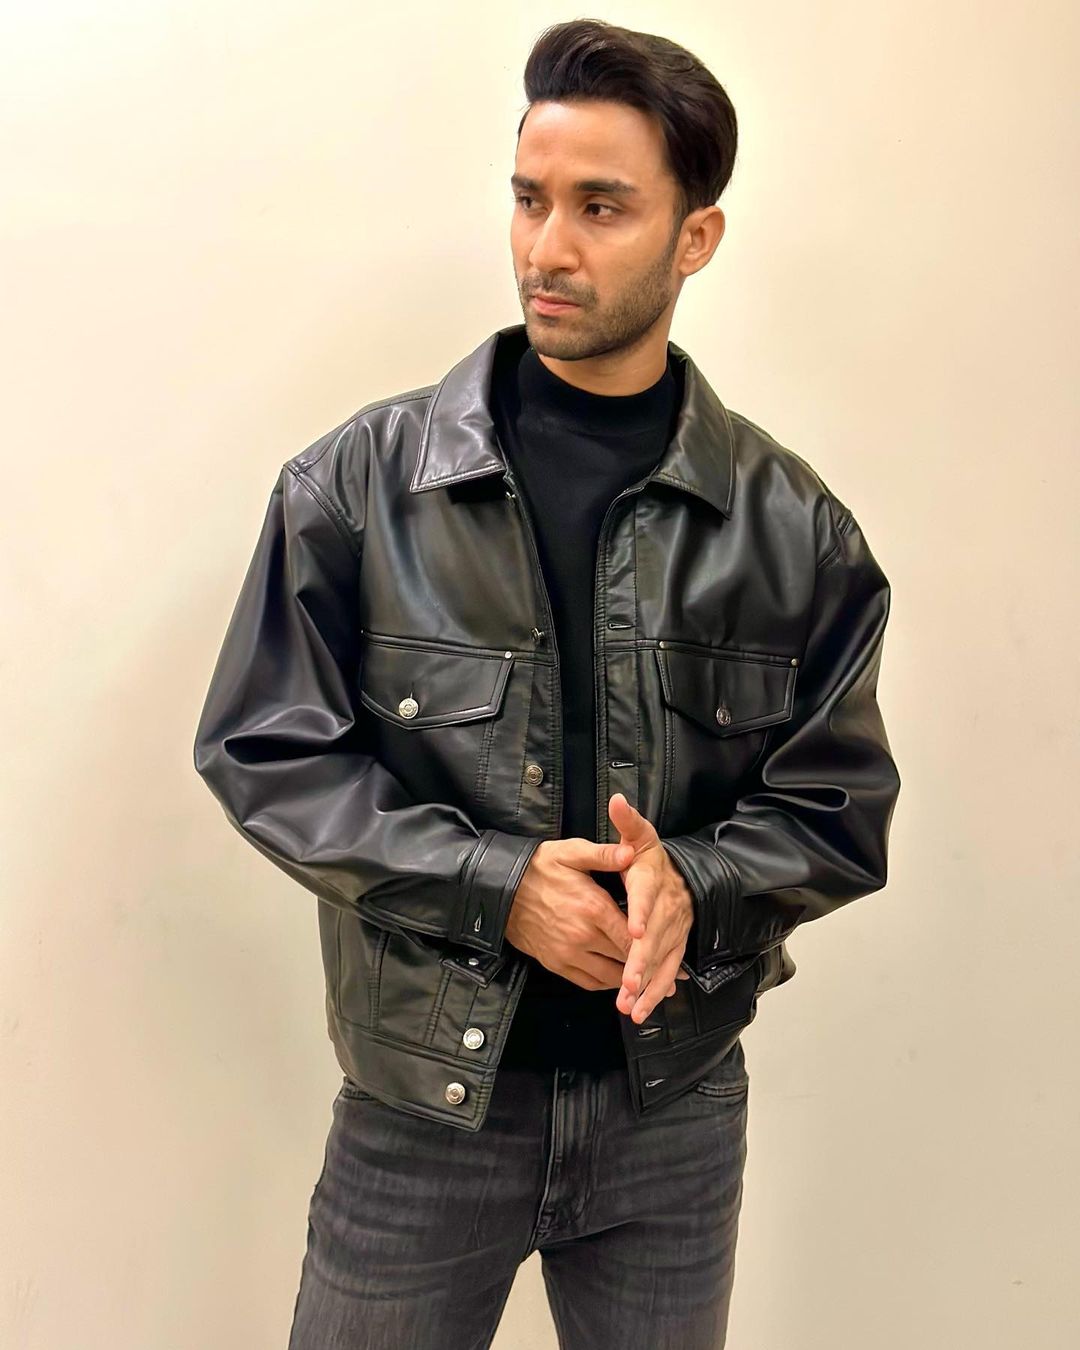 Kill Actor Raghav Juyal Opens Up The Challenges Of Transitioning From Reality TV To Bollywood! Check it out!